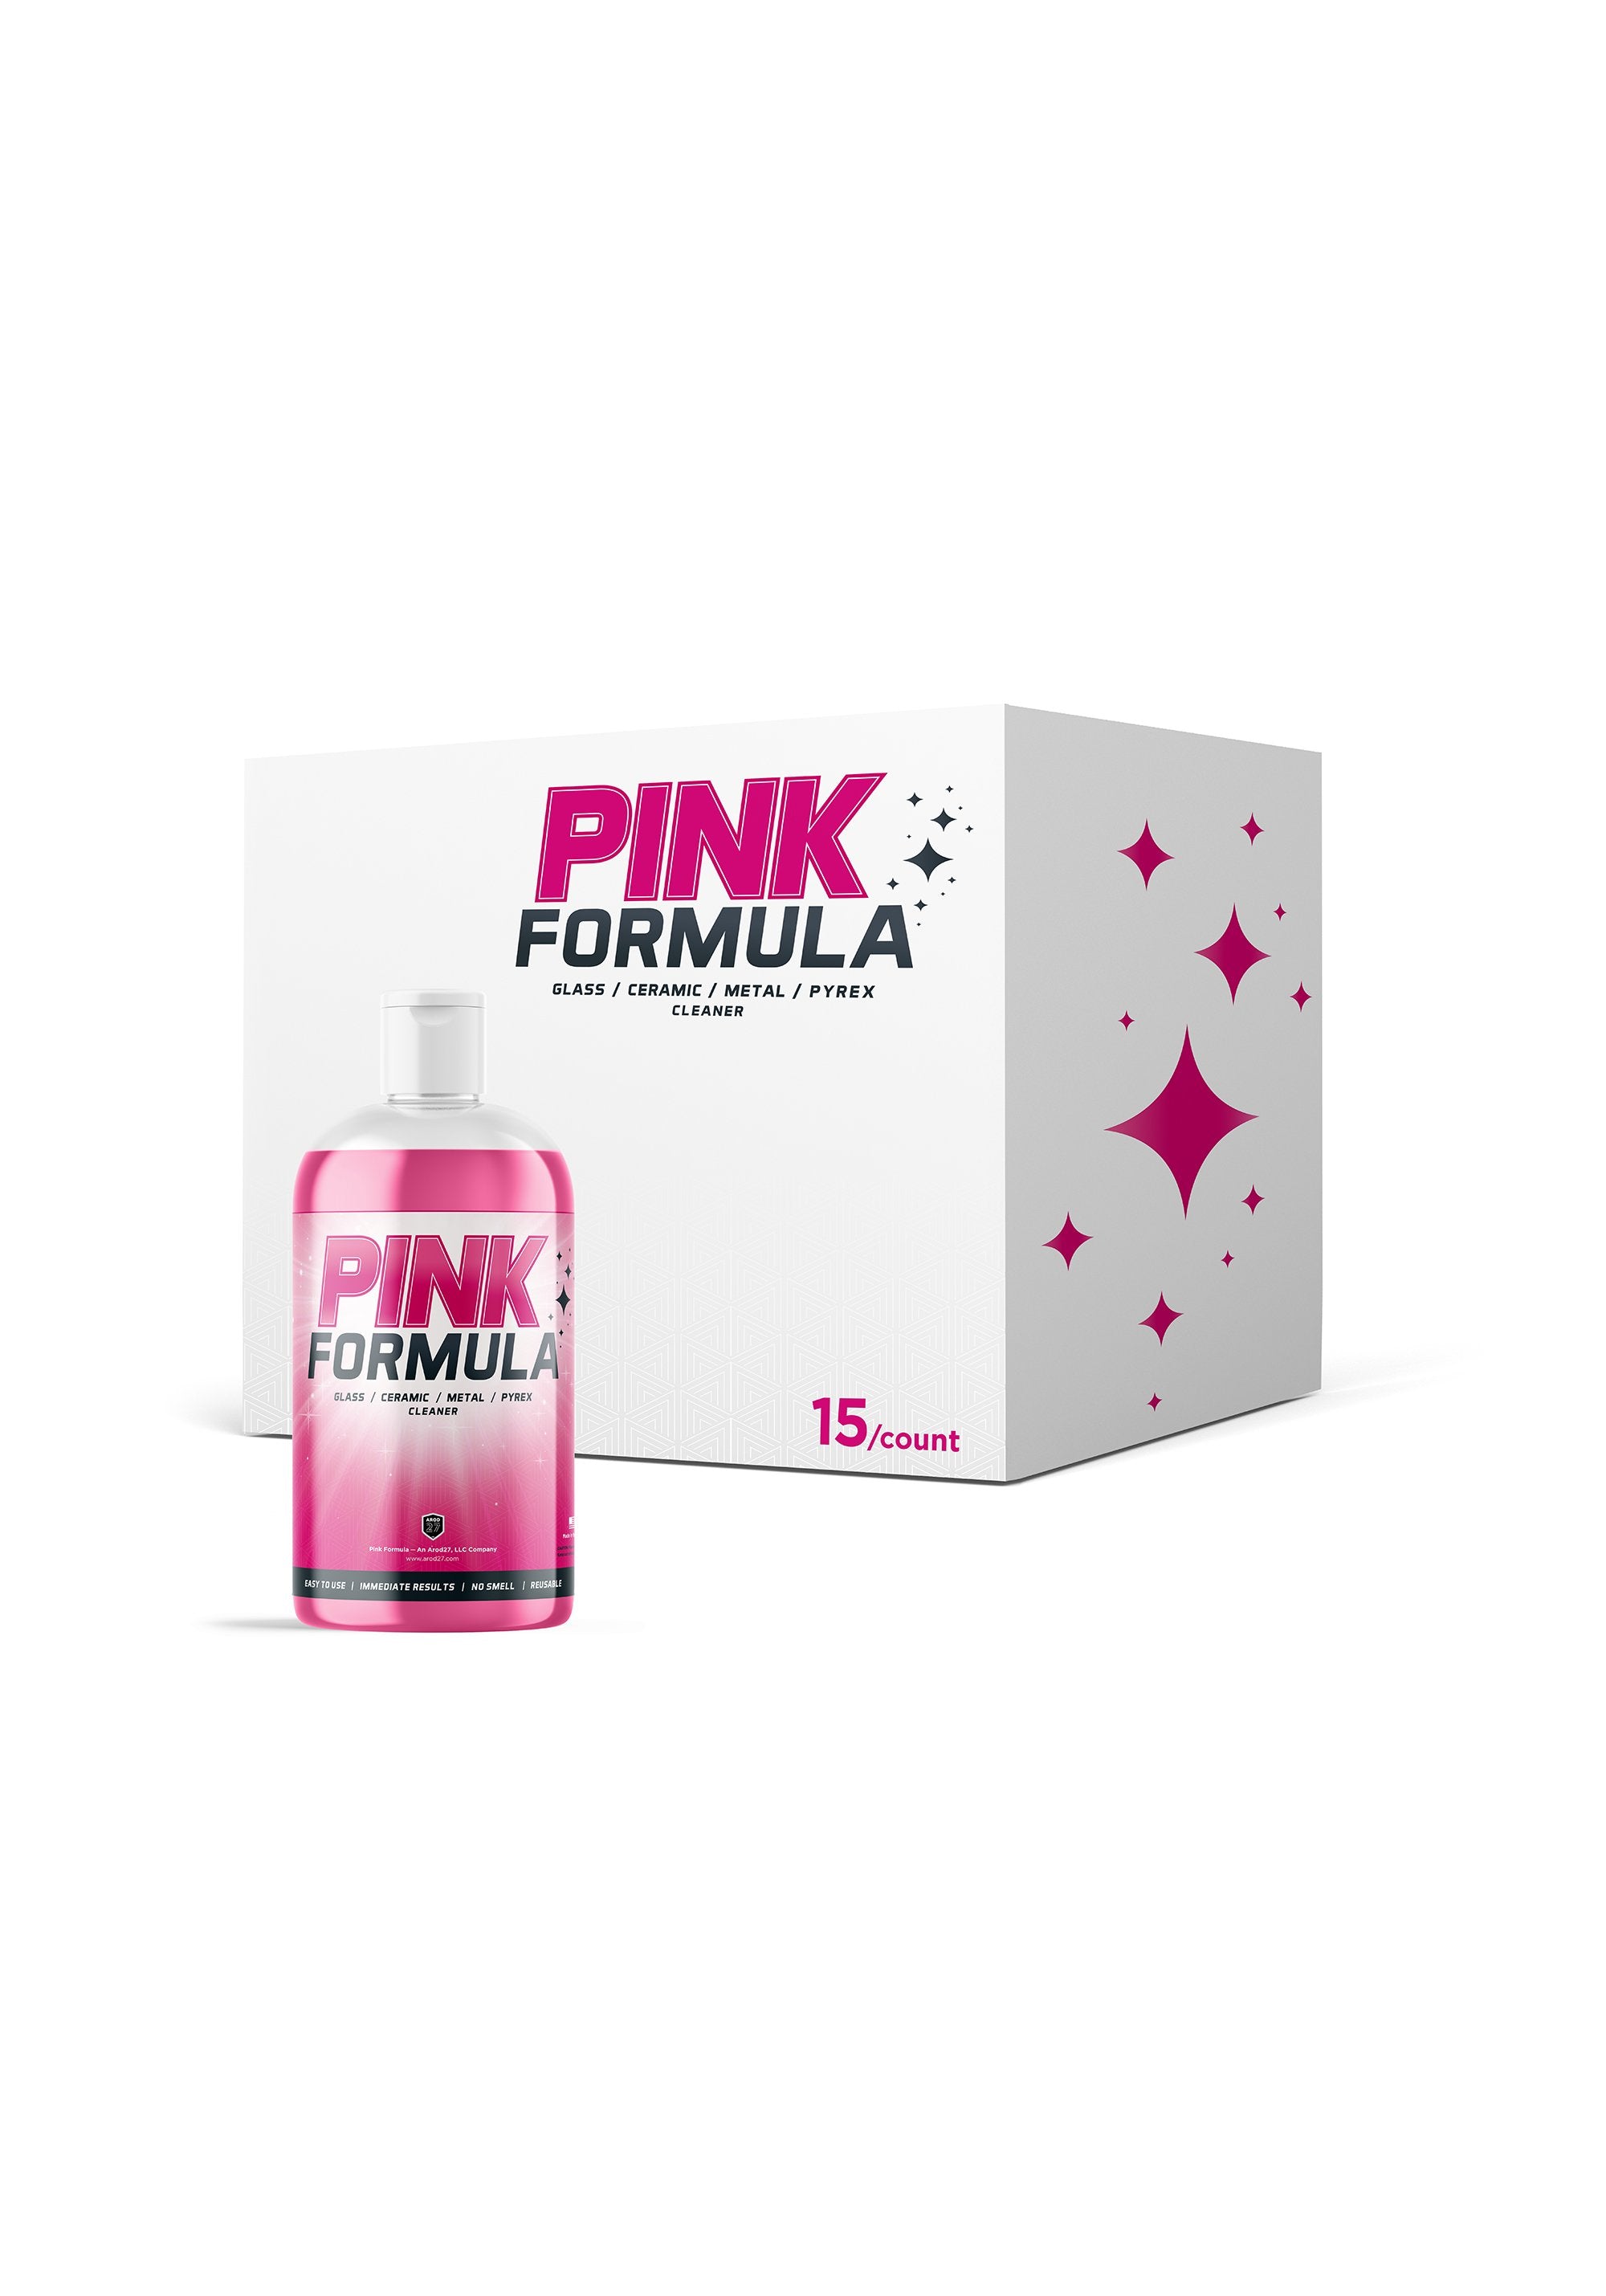 Pink Formula Cleaner 16oz Bottle Case (15pc) - ($10 BUILT IN SHIPPING FEE INCLUDED)